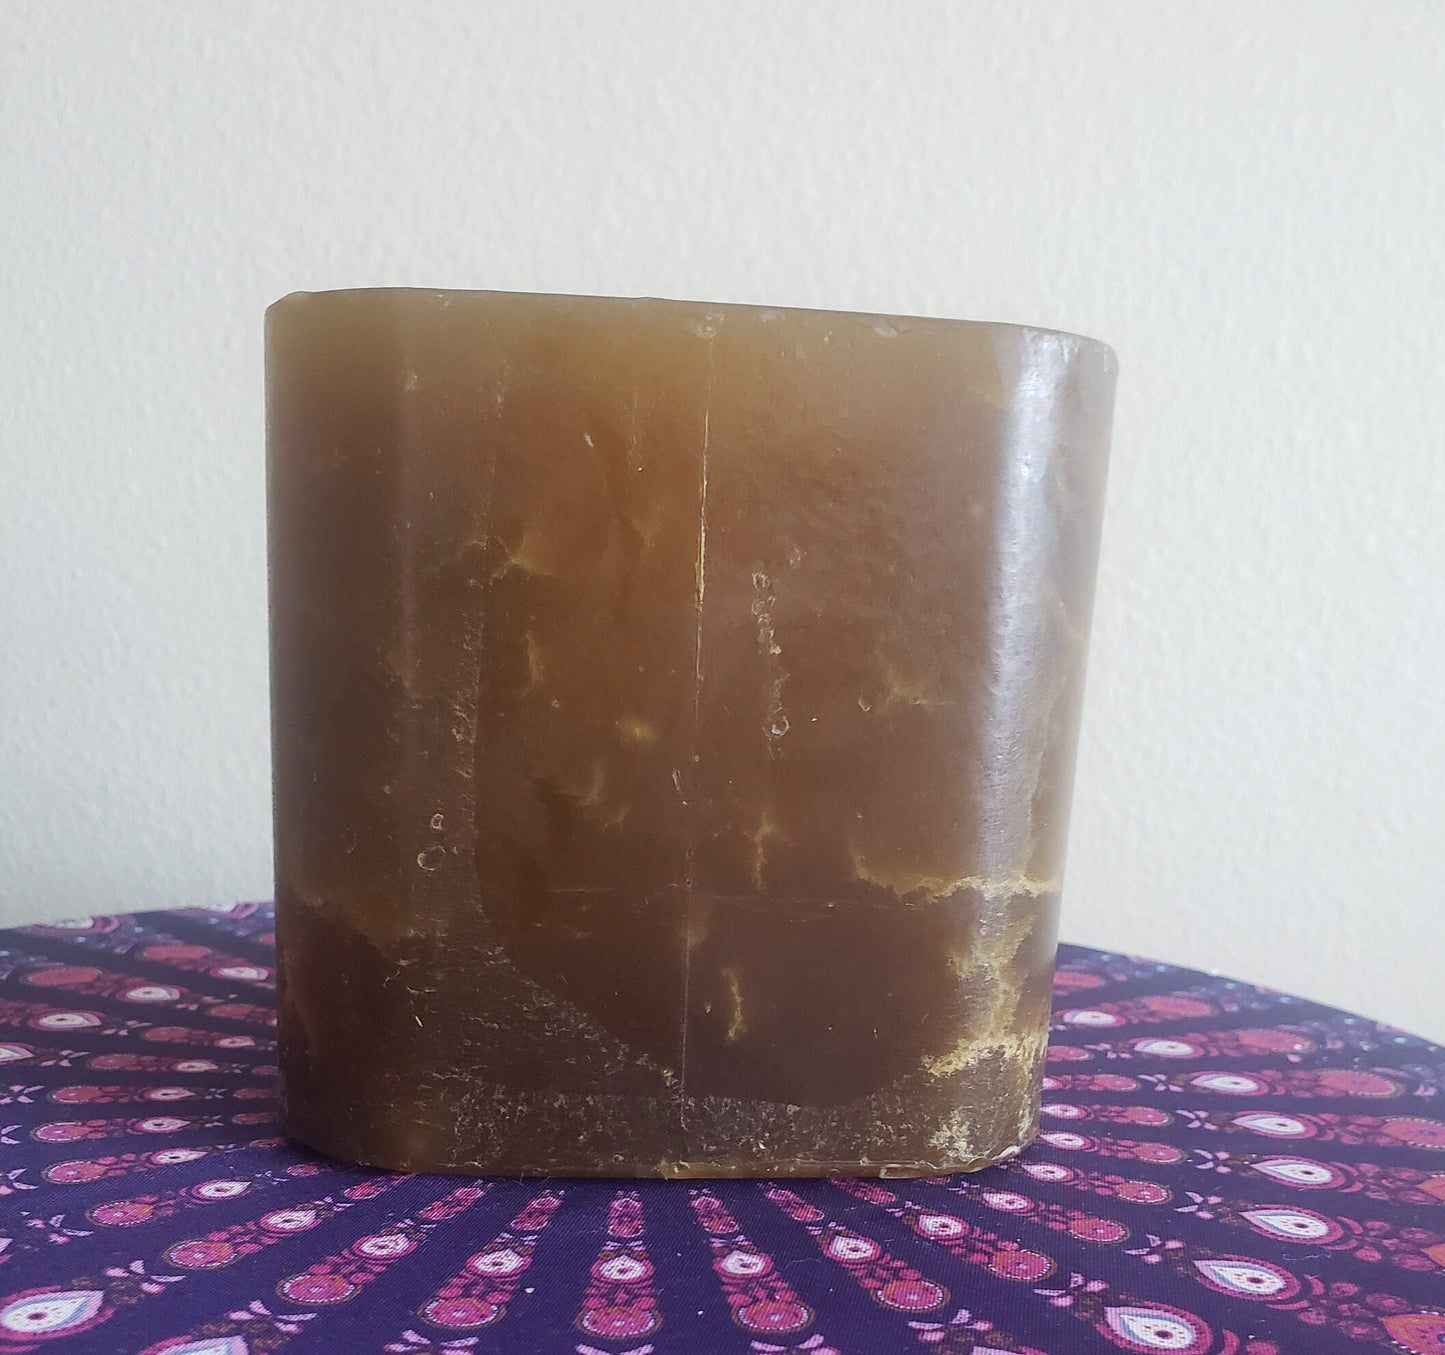 Real Wax Flameless Votive/Tealight Candle Holder - Distressed Honey/Amber Beeswax Color